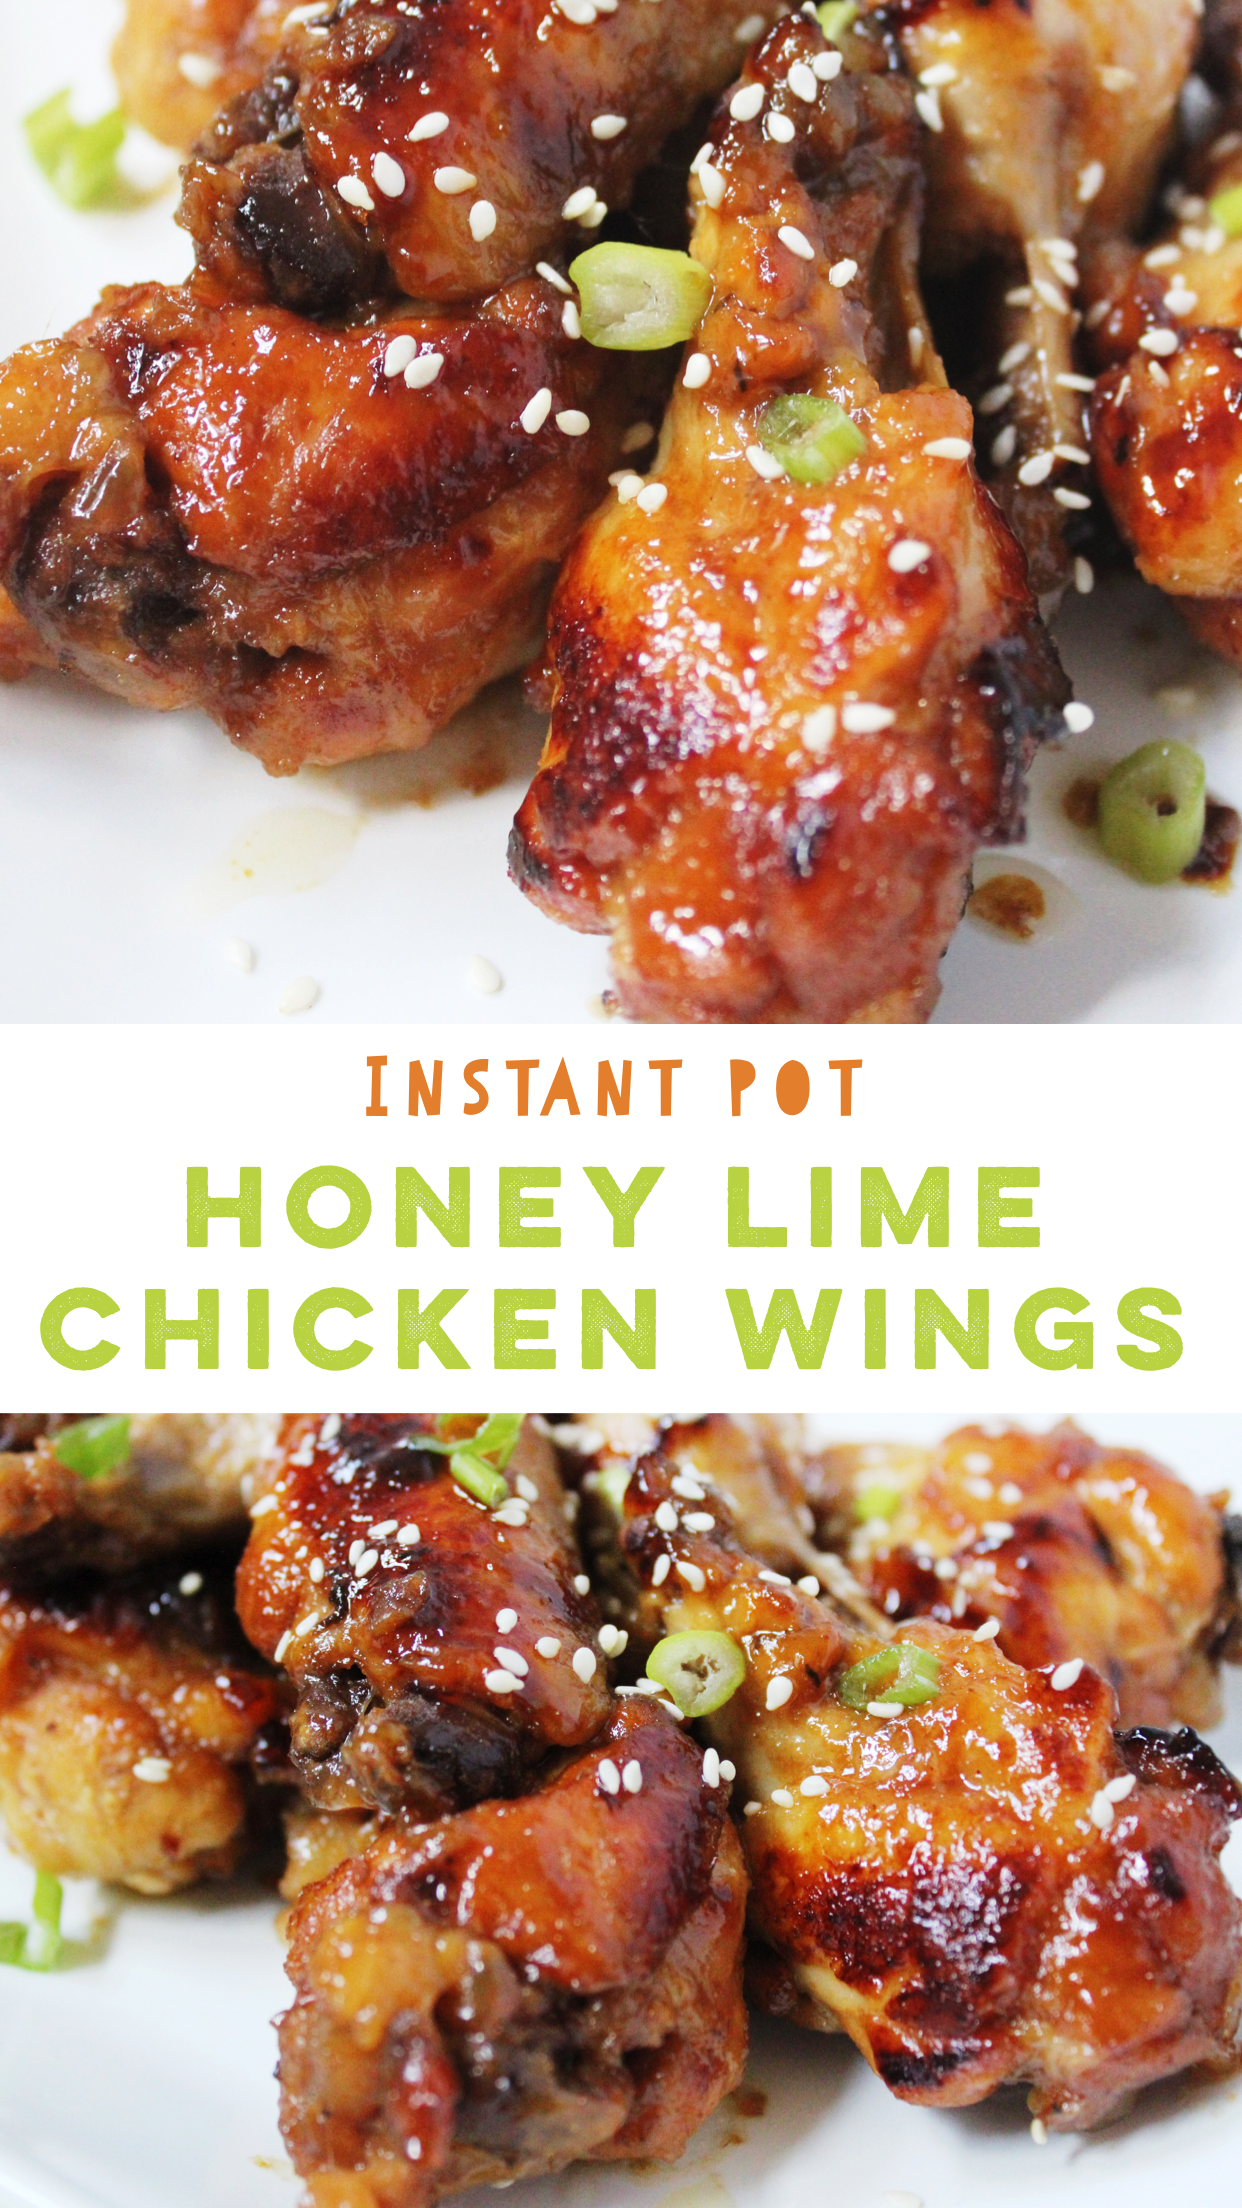 Instant pot honey lime chicken wings